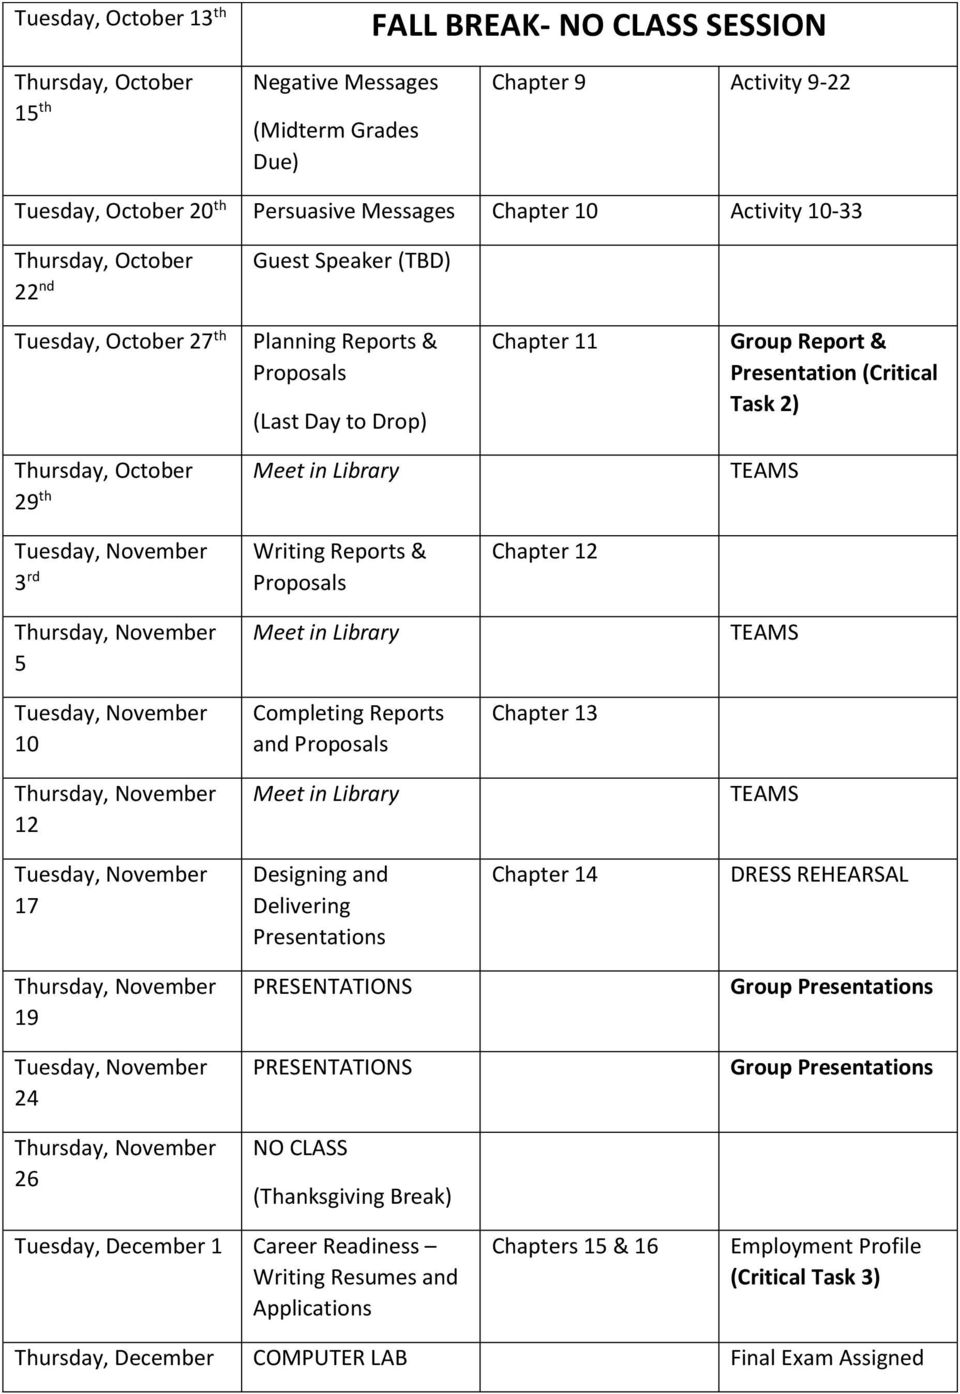 October 29 th Meet in Library TEAMS Tuesday, November 3 rd Writing Reports & Proposals Chapter 12 Thursday, November 5 Meet in Library TEAMS Tuesday, November 10 Completing Reports and Proposals